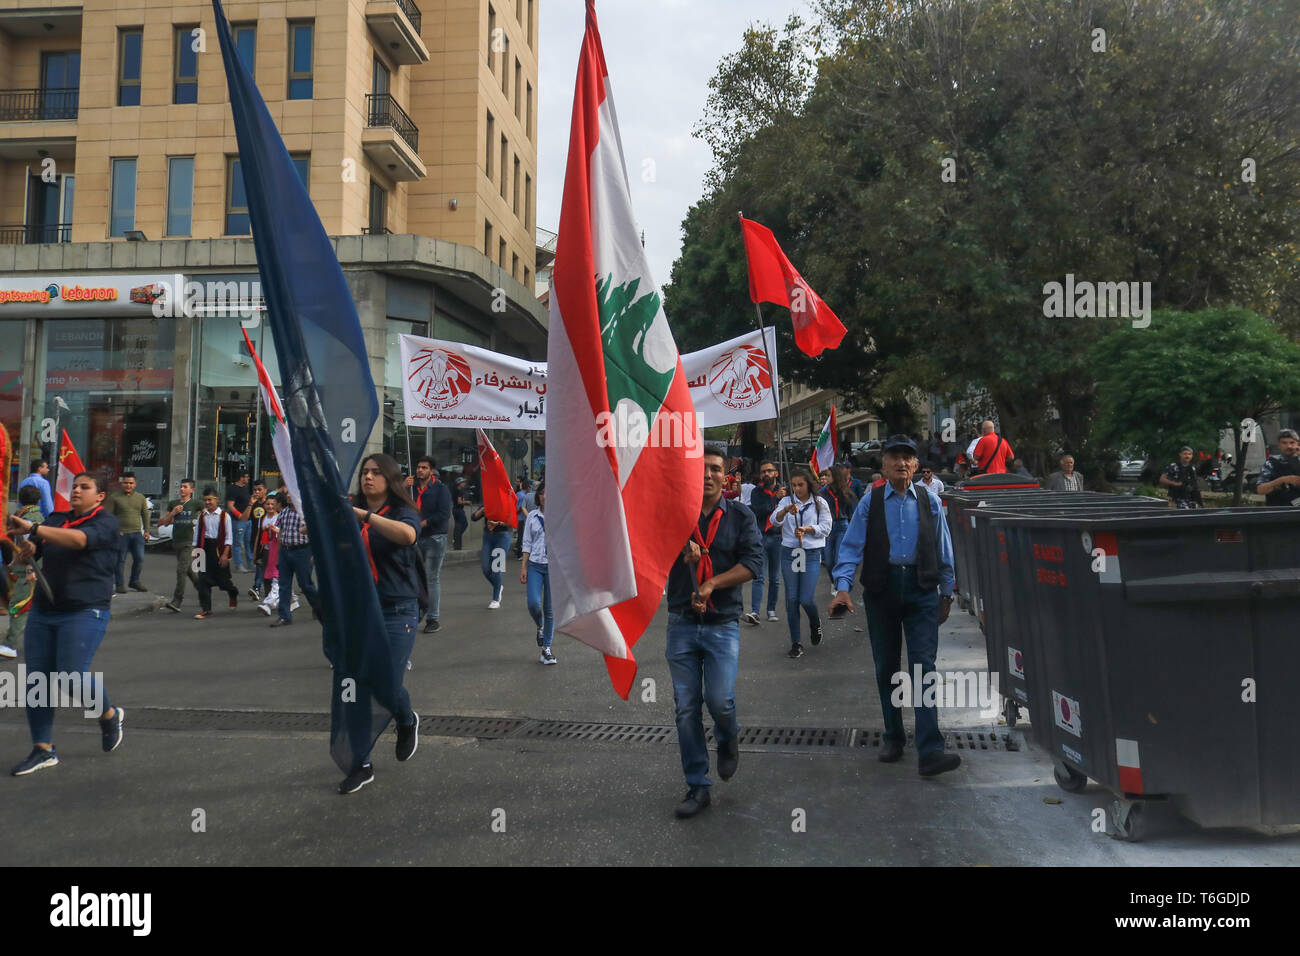 Beirut, Lebanon. 1st May, 2019. Thousands of supporters of the Lebanese Communist party take part in a May Day rally through central Beirut as they mark International Workers' Day Credit: amer ghazzal/Alamy Live News Stock Photo